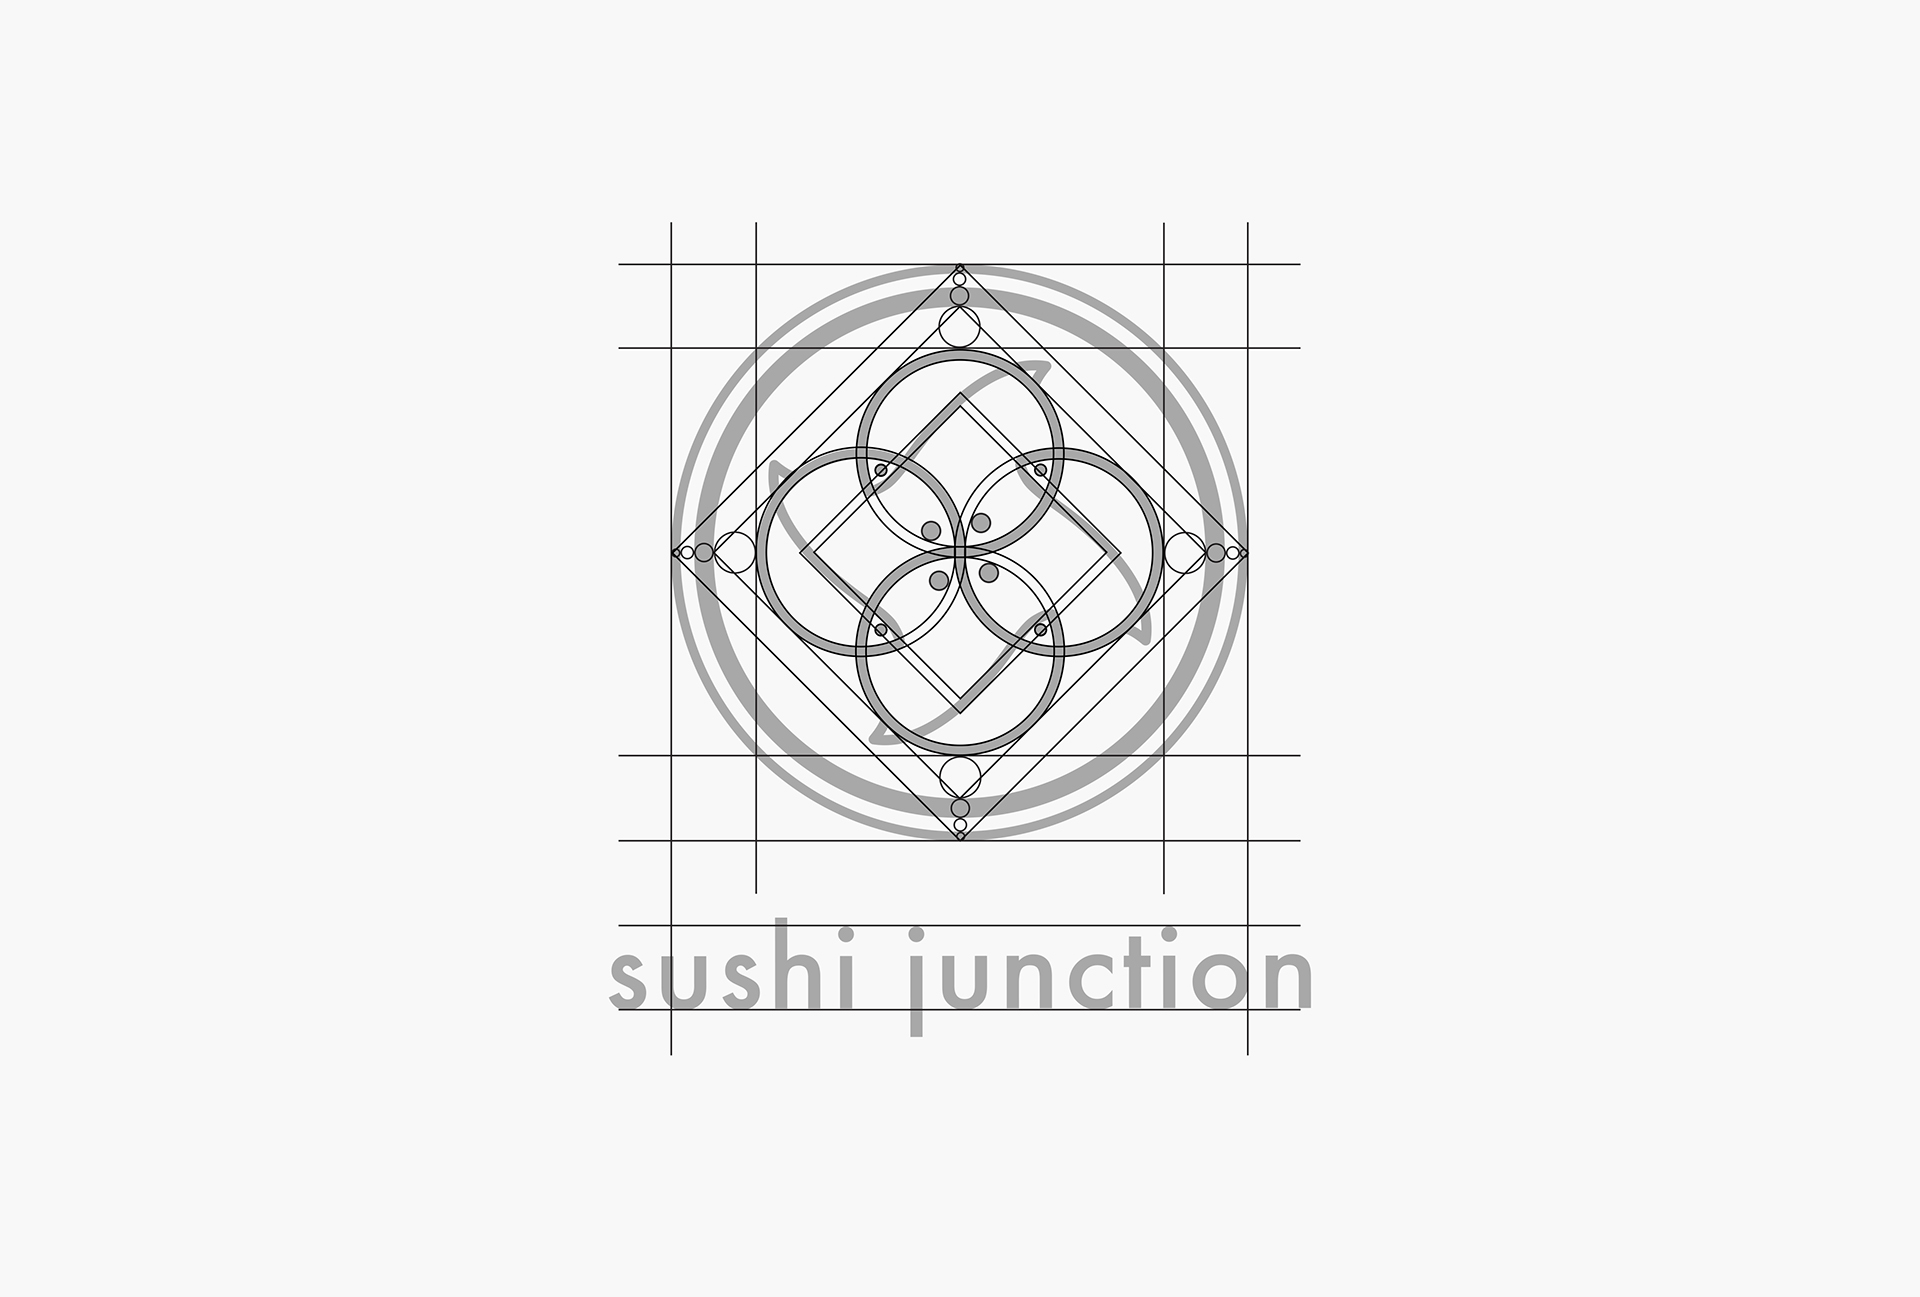 Branding for Sushi Junction by Lee Ching Tat